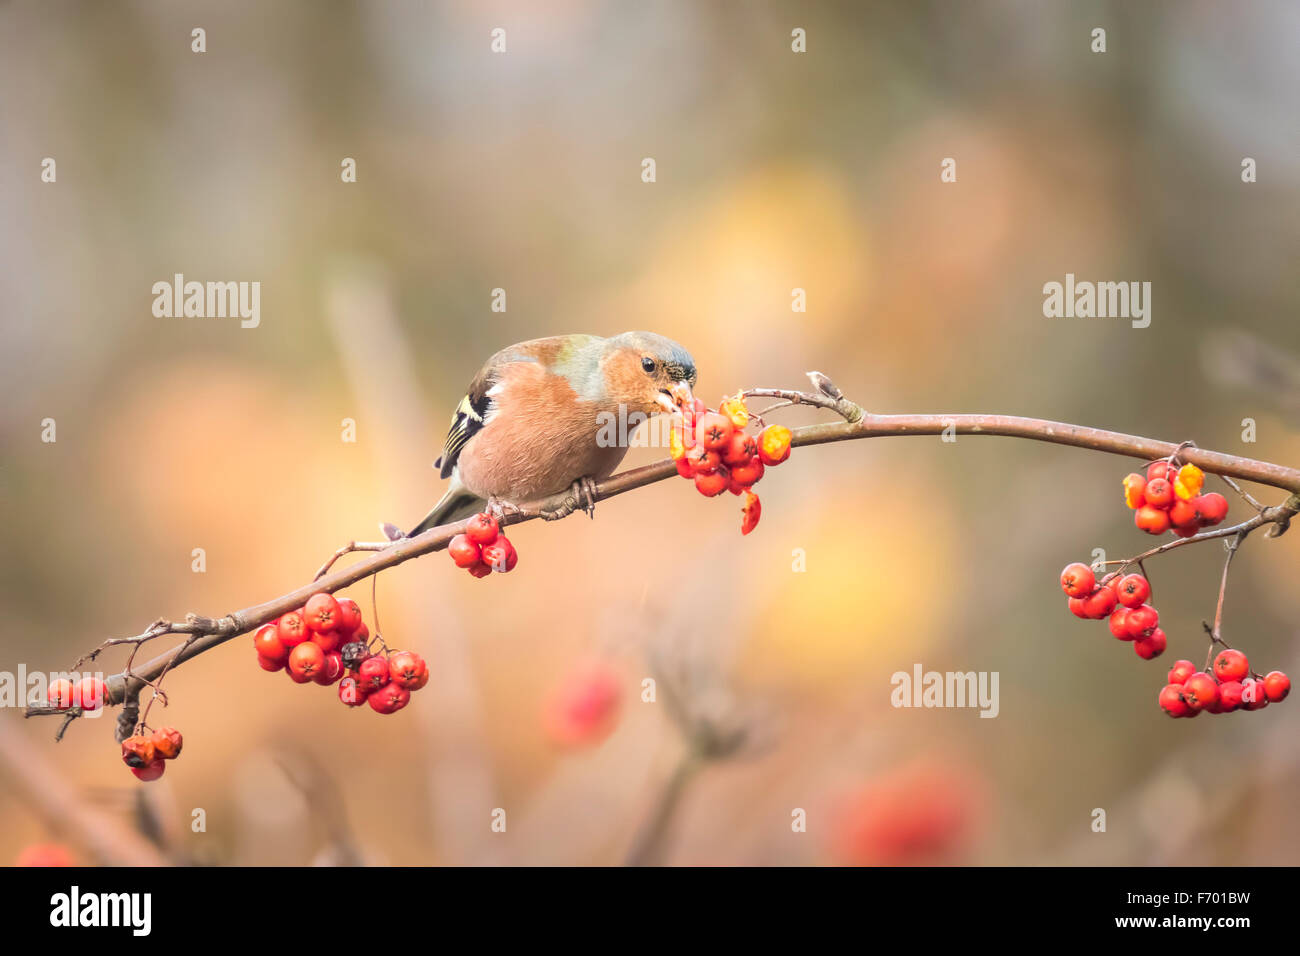 A male chaffinch, Fringilla coelebs, eating Sorbus, rowan, berries from a tree. Fall colors are clearly visible. Stock Photo